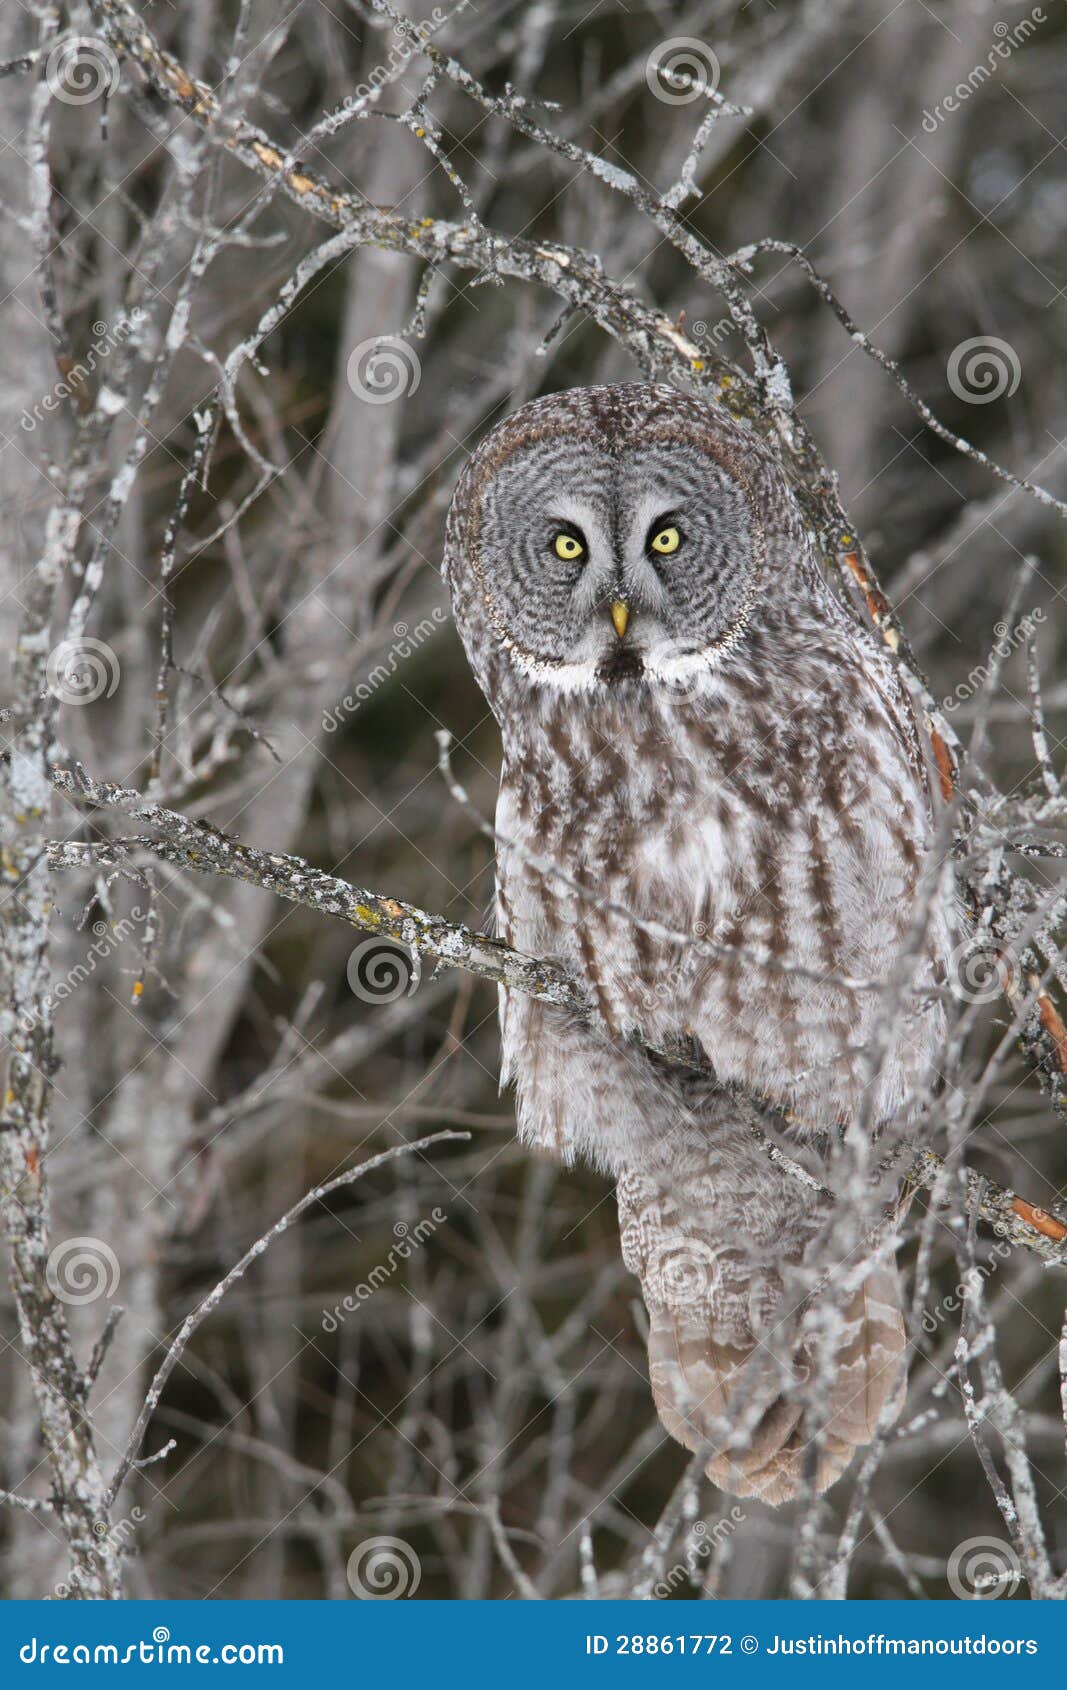 great gray owl in tree